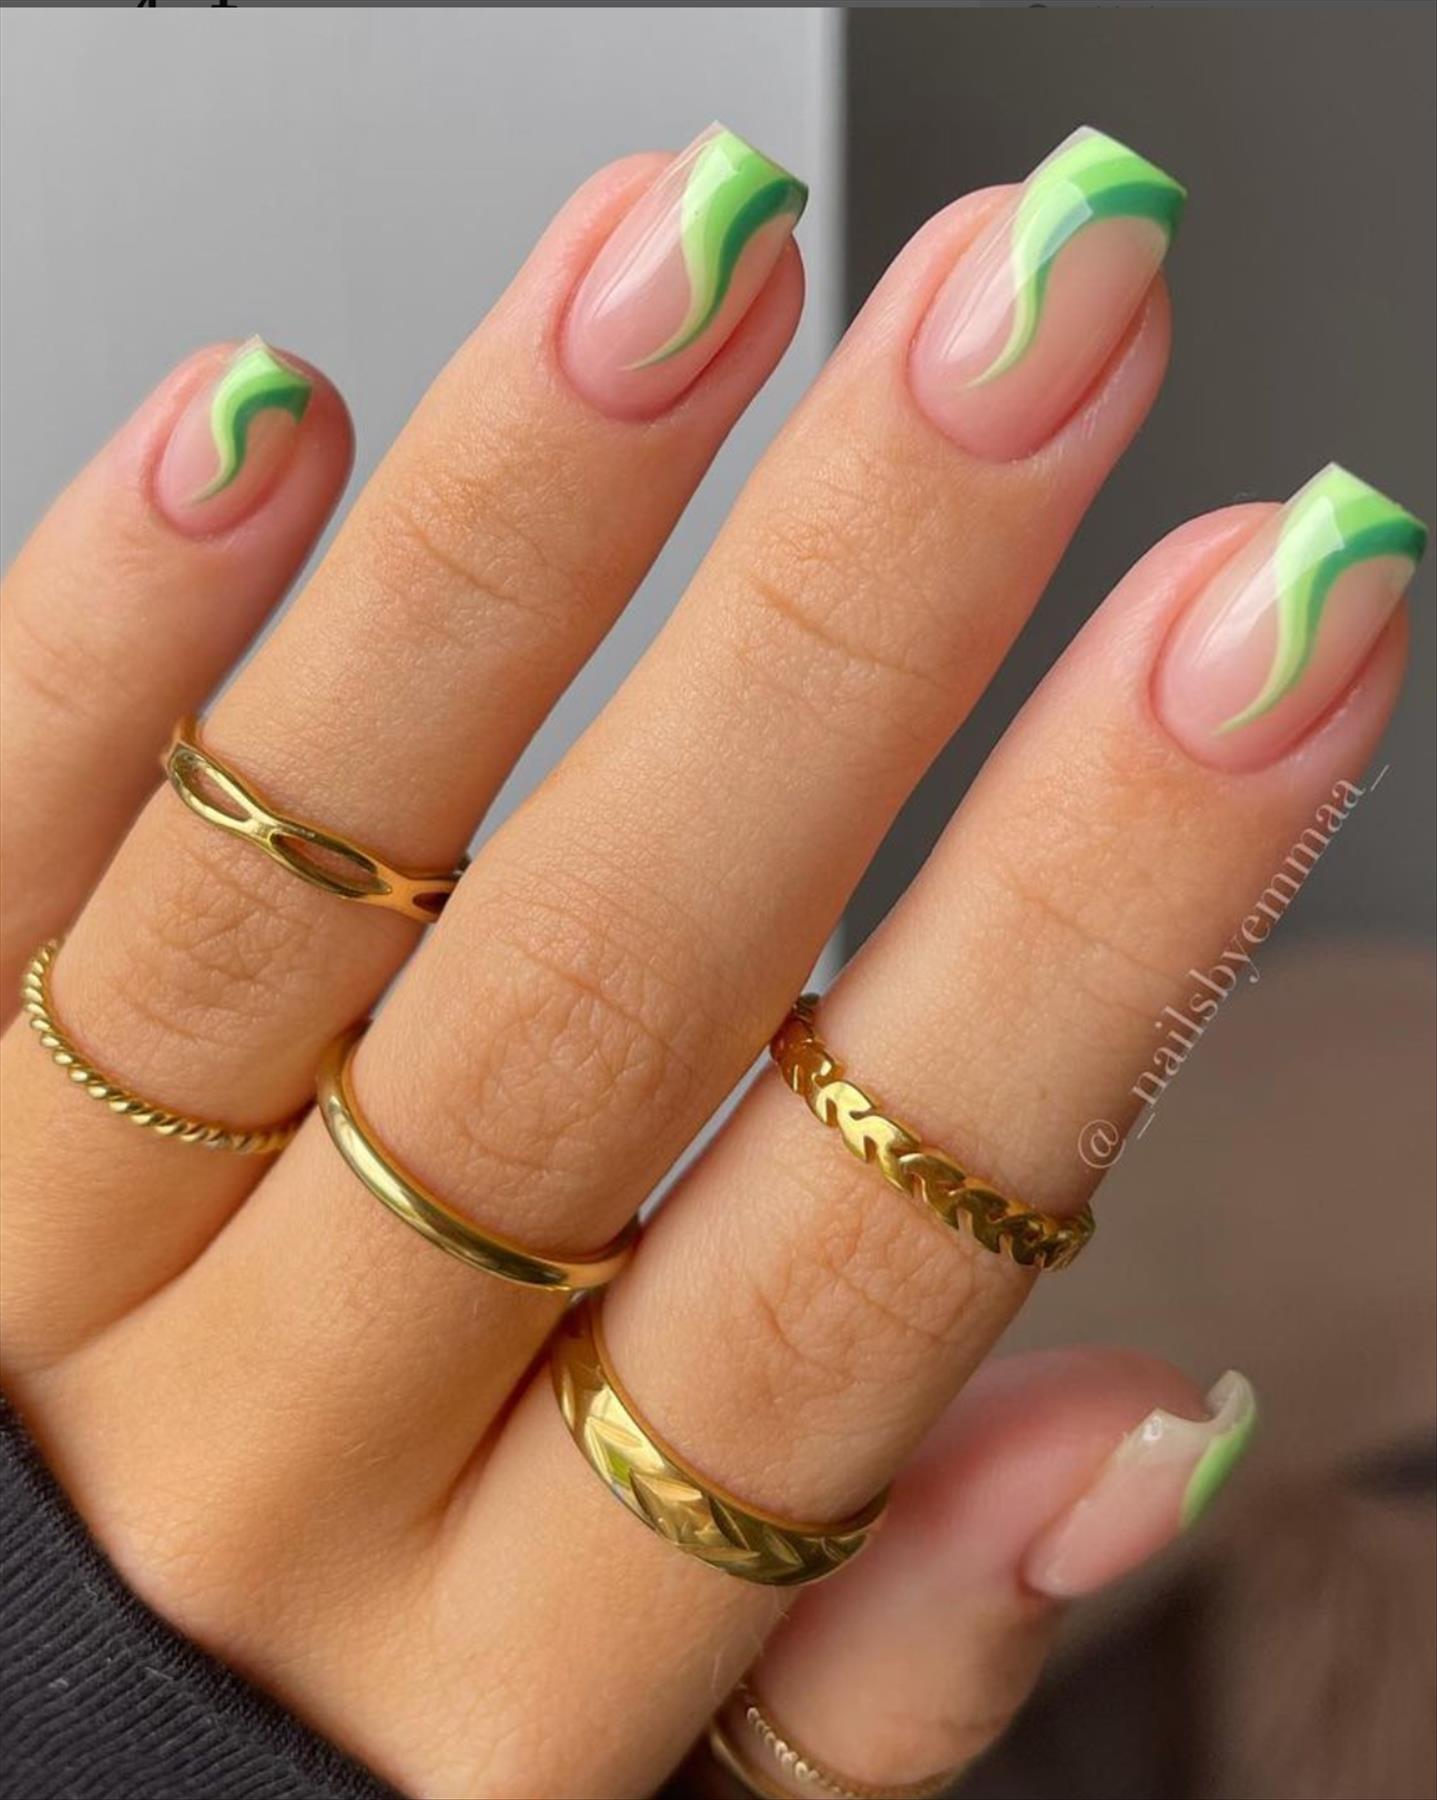 Fabulous short acrylic coffin nails ideas for 2022